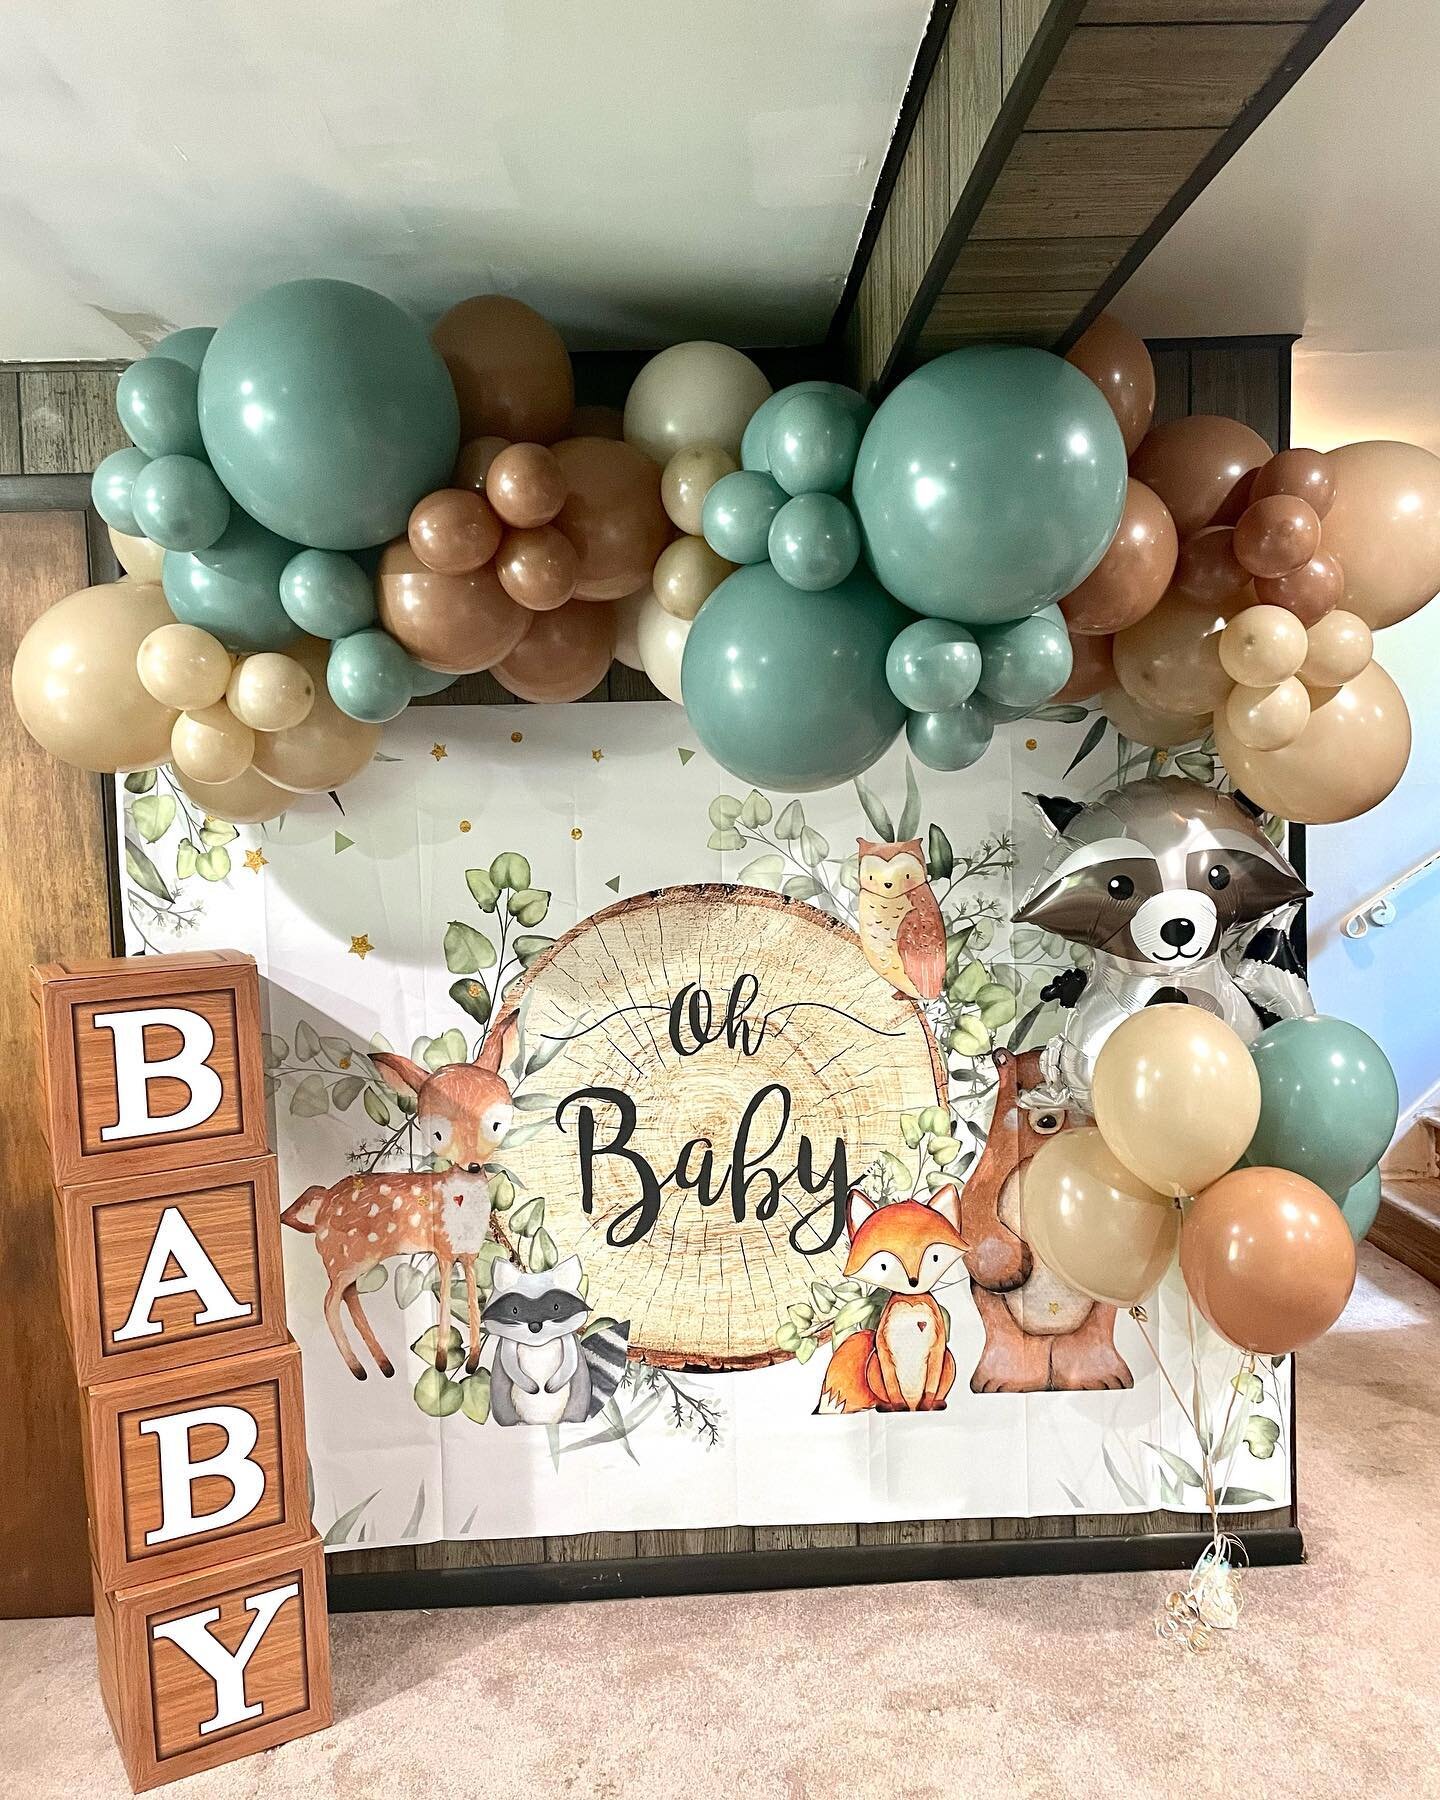 I love the thought you put into planning these special parties. Whether it&rsquo;s to welcome a new baby, celebrate a special birthday, or celebrate a special milestone, you always come up with the cutest ideas! 💚

If you need a smaller setup or hav